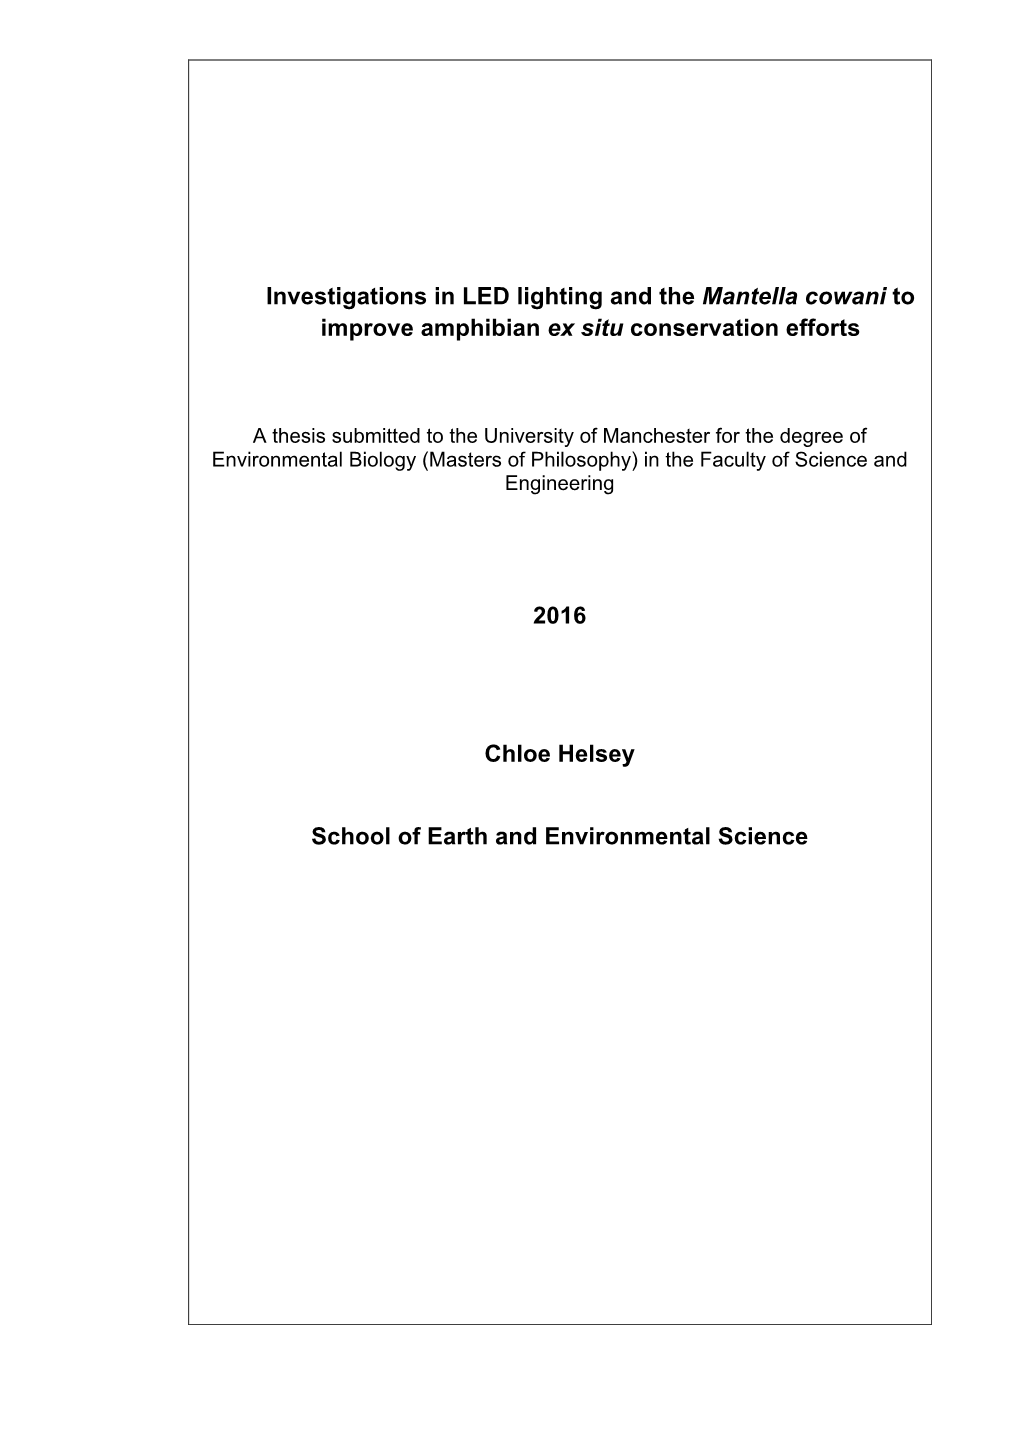 Investigations in LED Lighting and the Mantella Cowani to Improve Amphibian Ex Situ Conservation Efforts